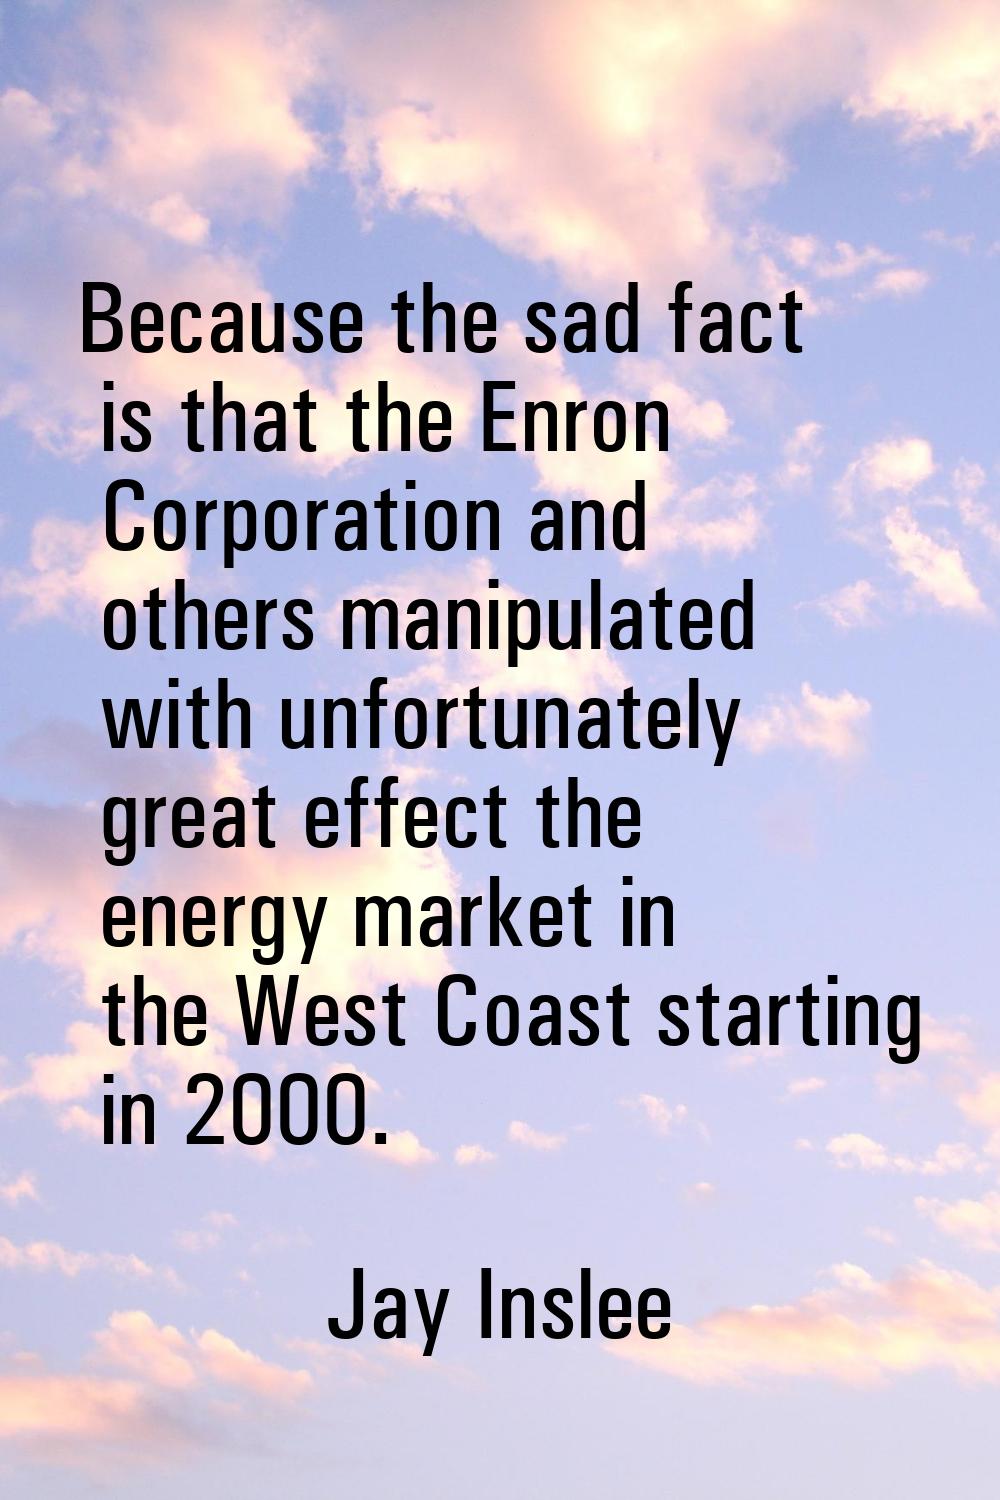 Because the sad fact is that the Enron Corporation and others manipulated with unfortunately great 